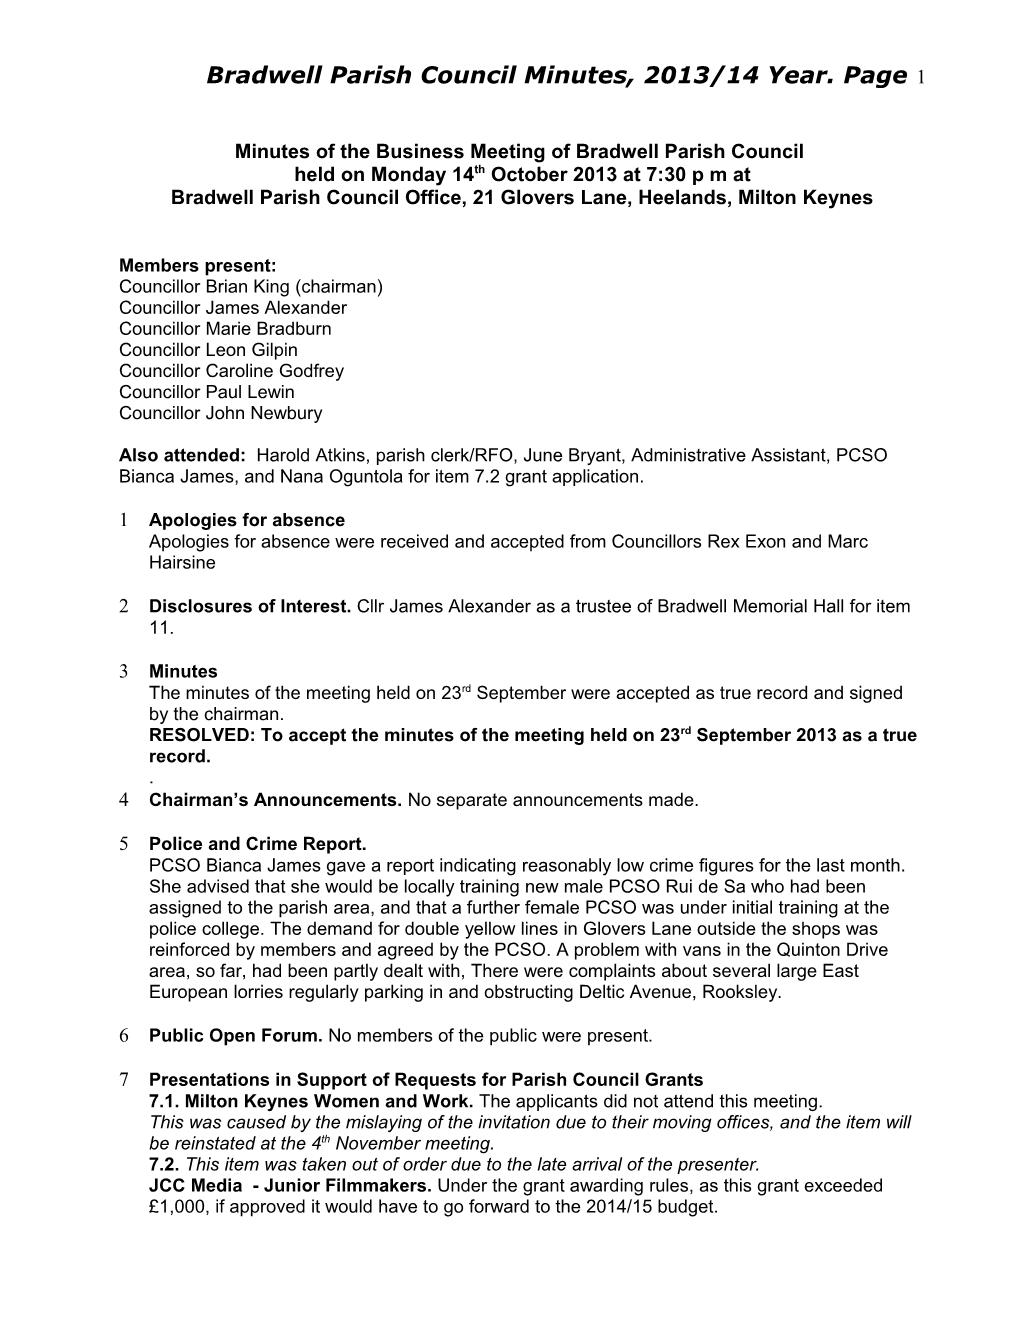 Minutes of the Full Bradwell Parish Council Meeting Held on Monday 16Th April 2007 At s3